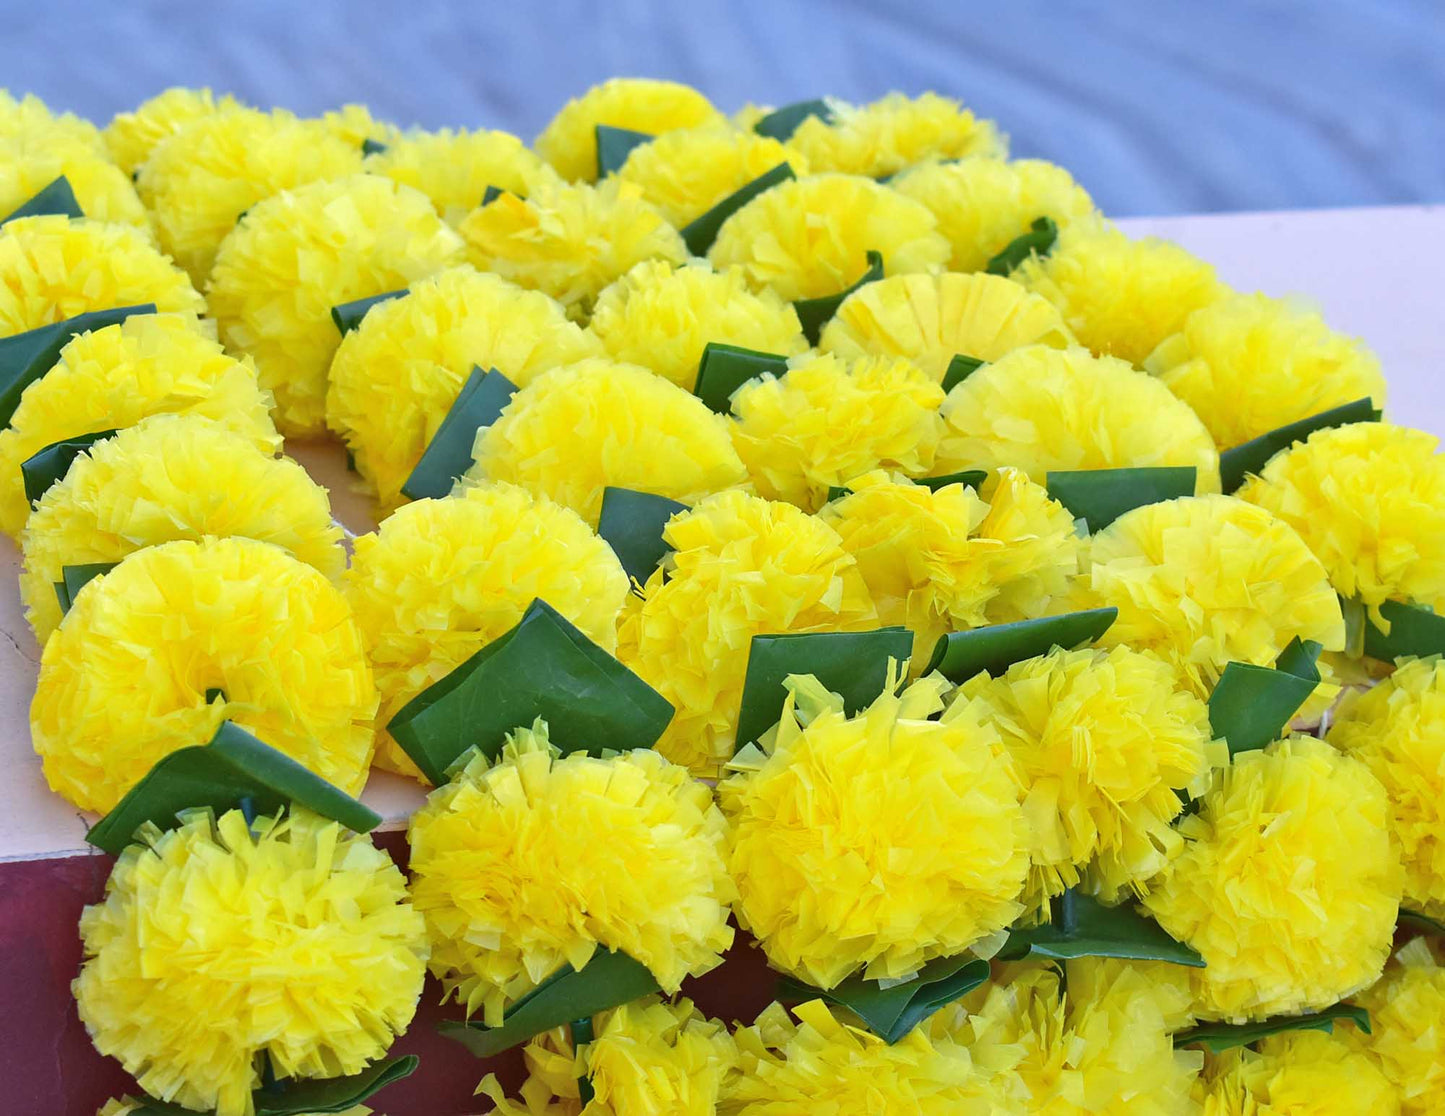 Pack of 5 - Artificial Marigold Flower Garland strings - 4.5 ft + (Yellow& green leaves)